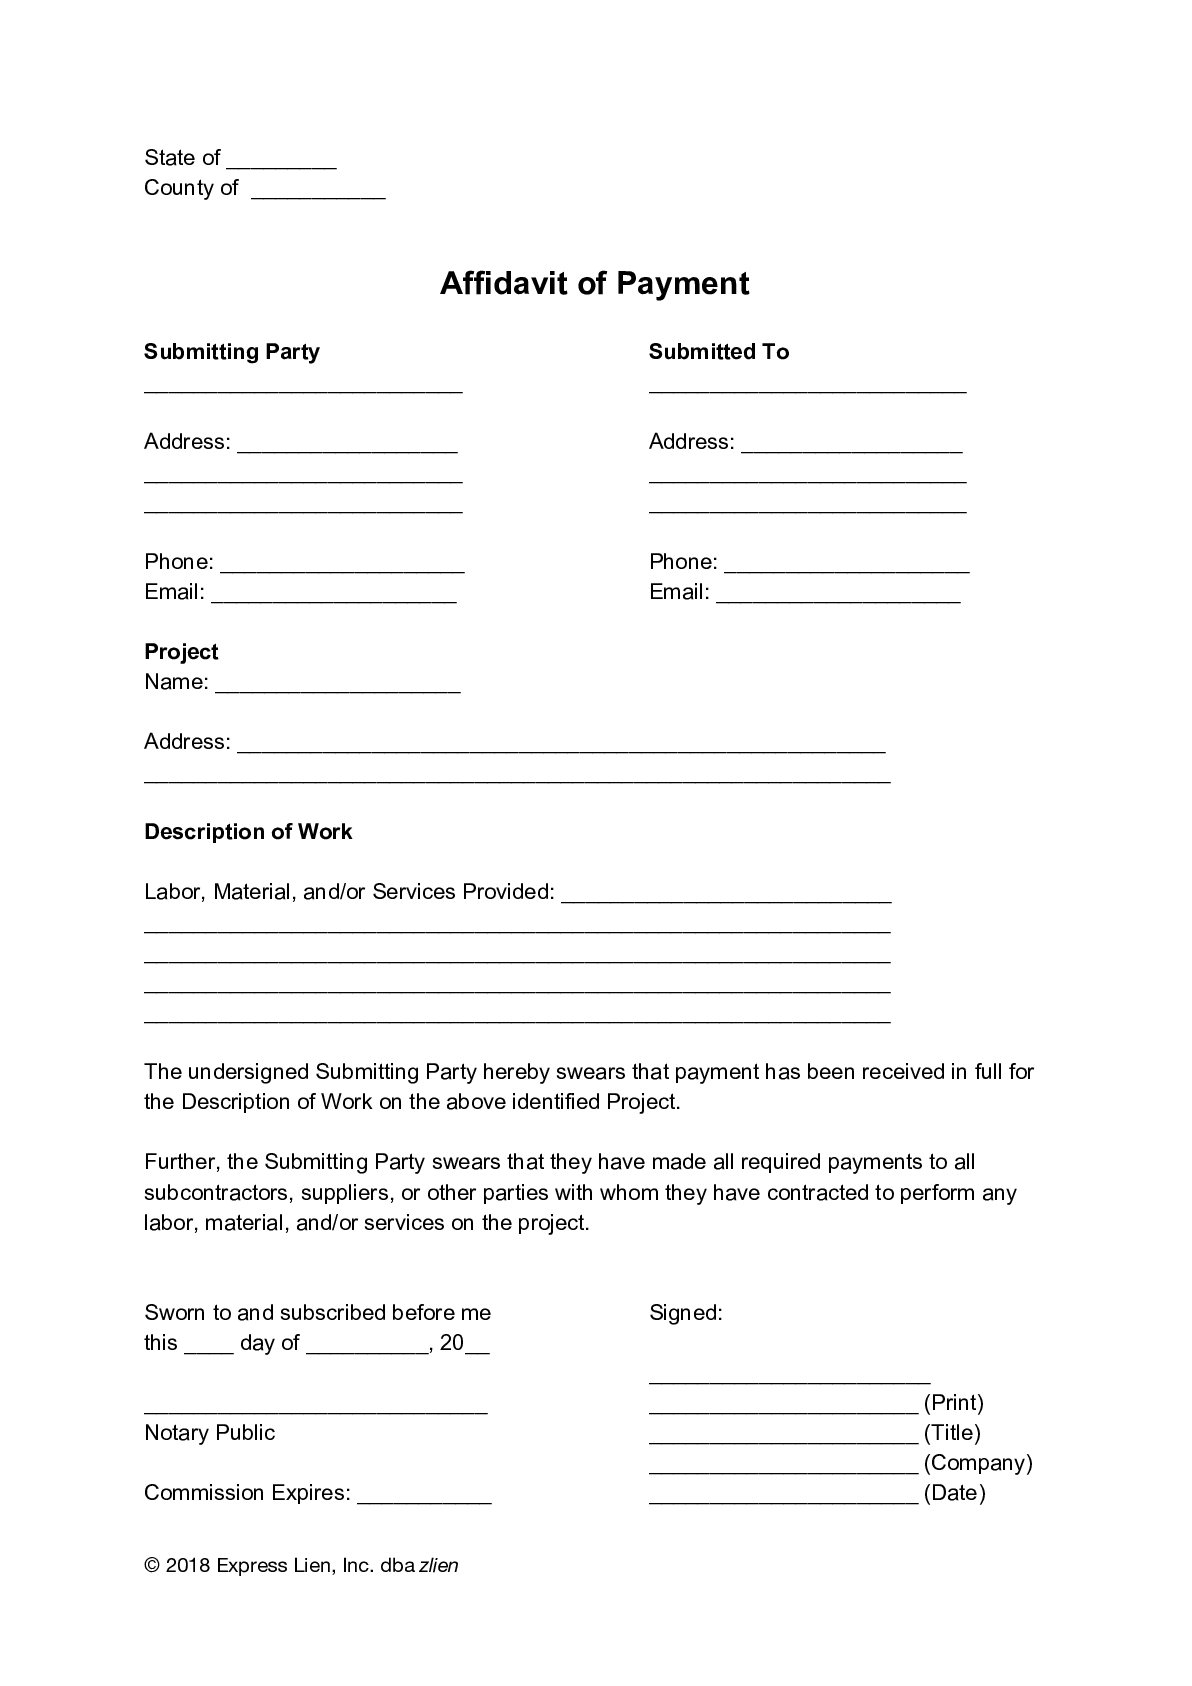 Affidavit of Payment (General) Form - free from